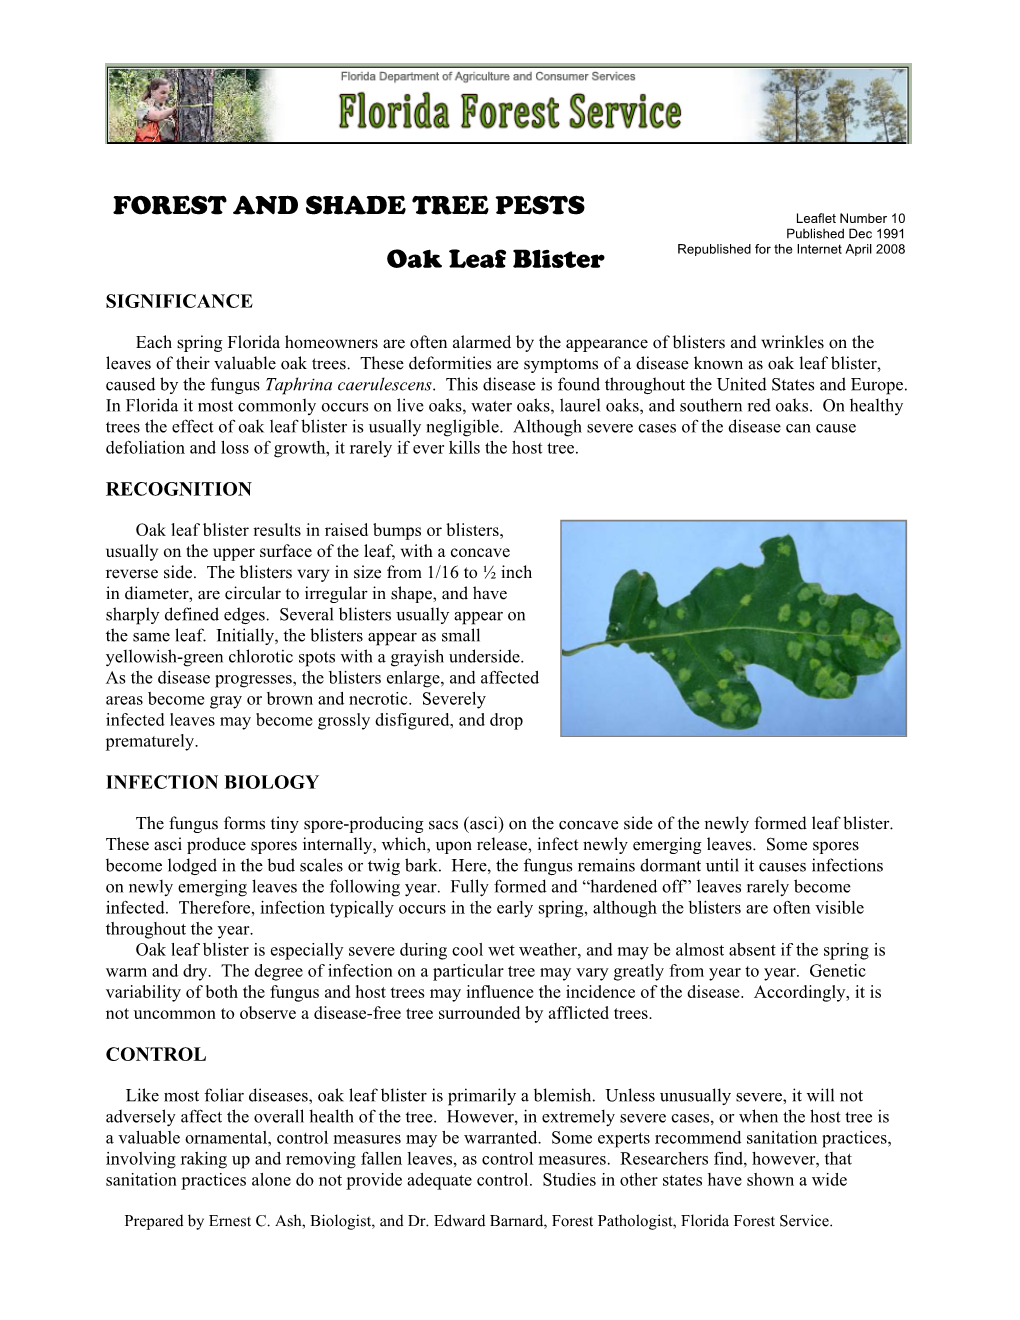 FOREST and SHADE TREE PESTS Oak Leaf Blister